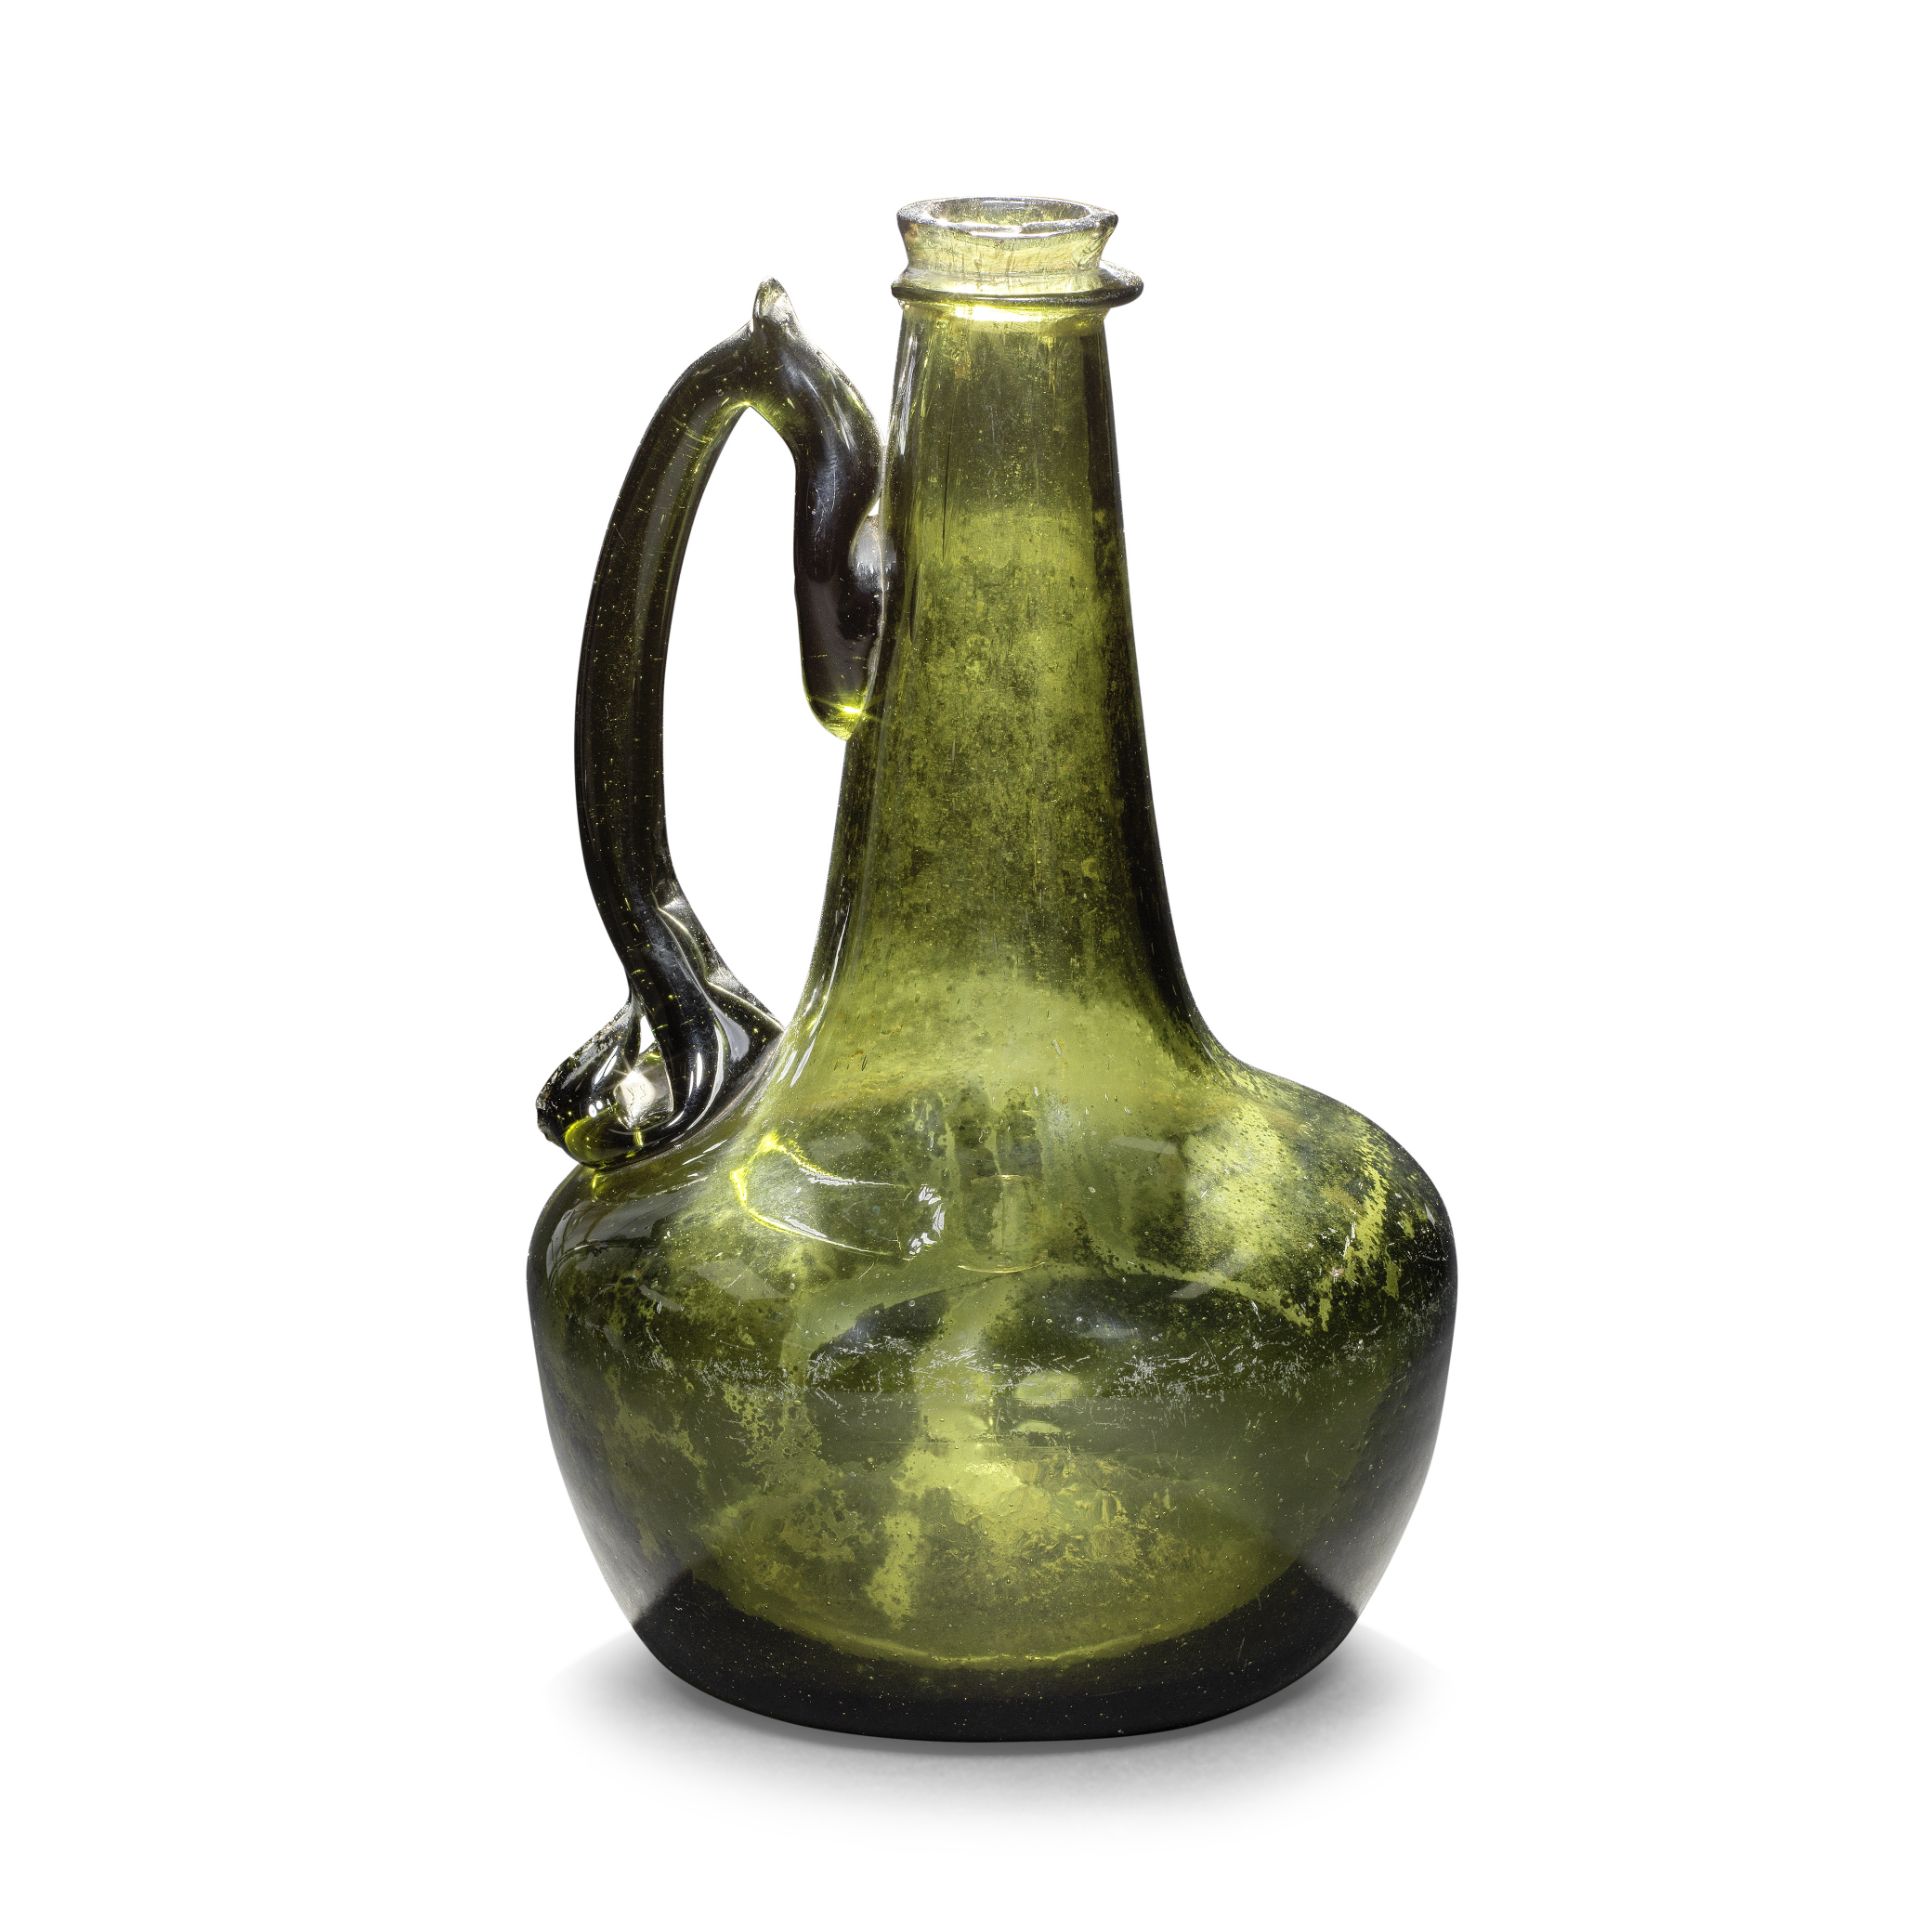 An exceptionally rare 'Shaft and Globe' serving bottle, circa 1670